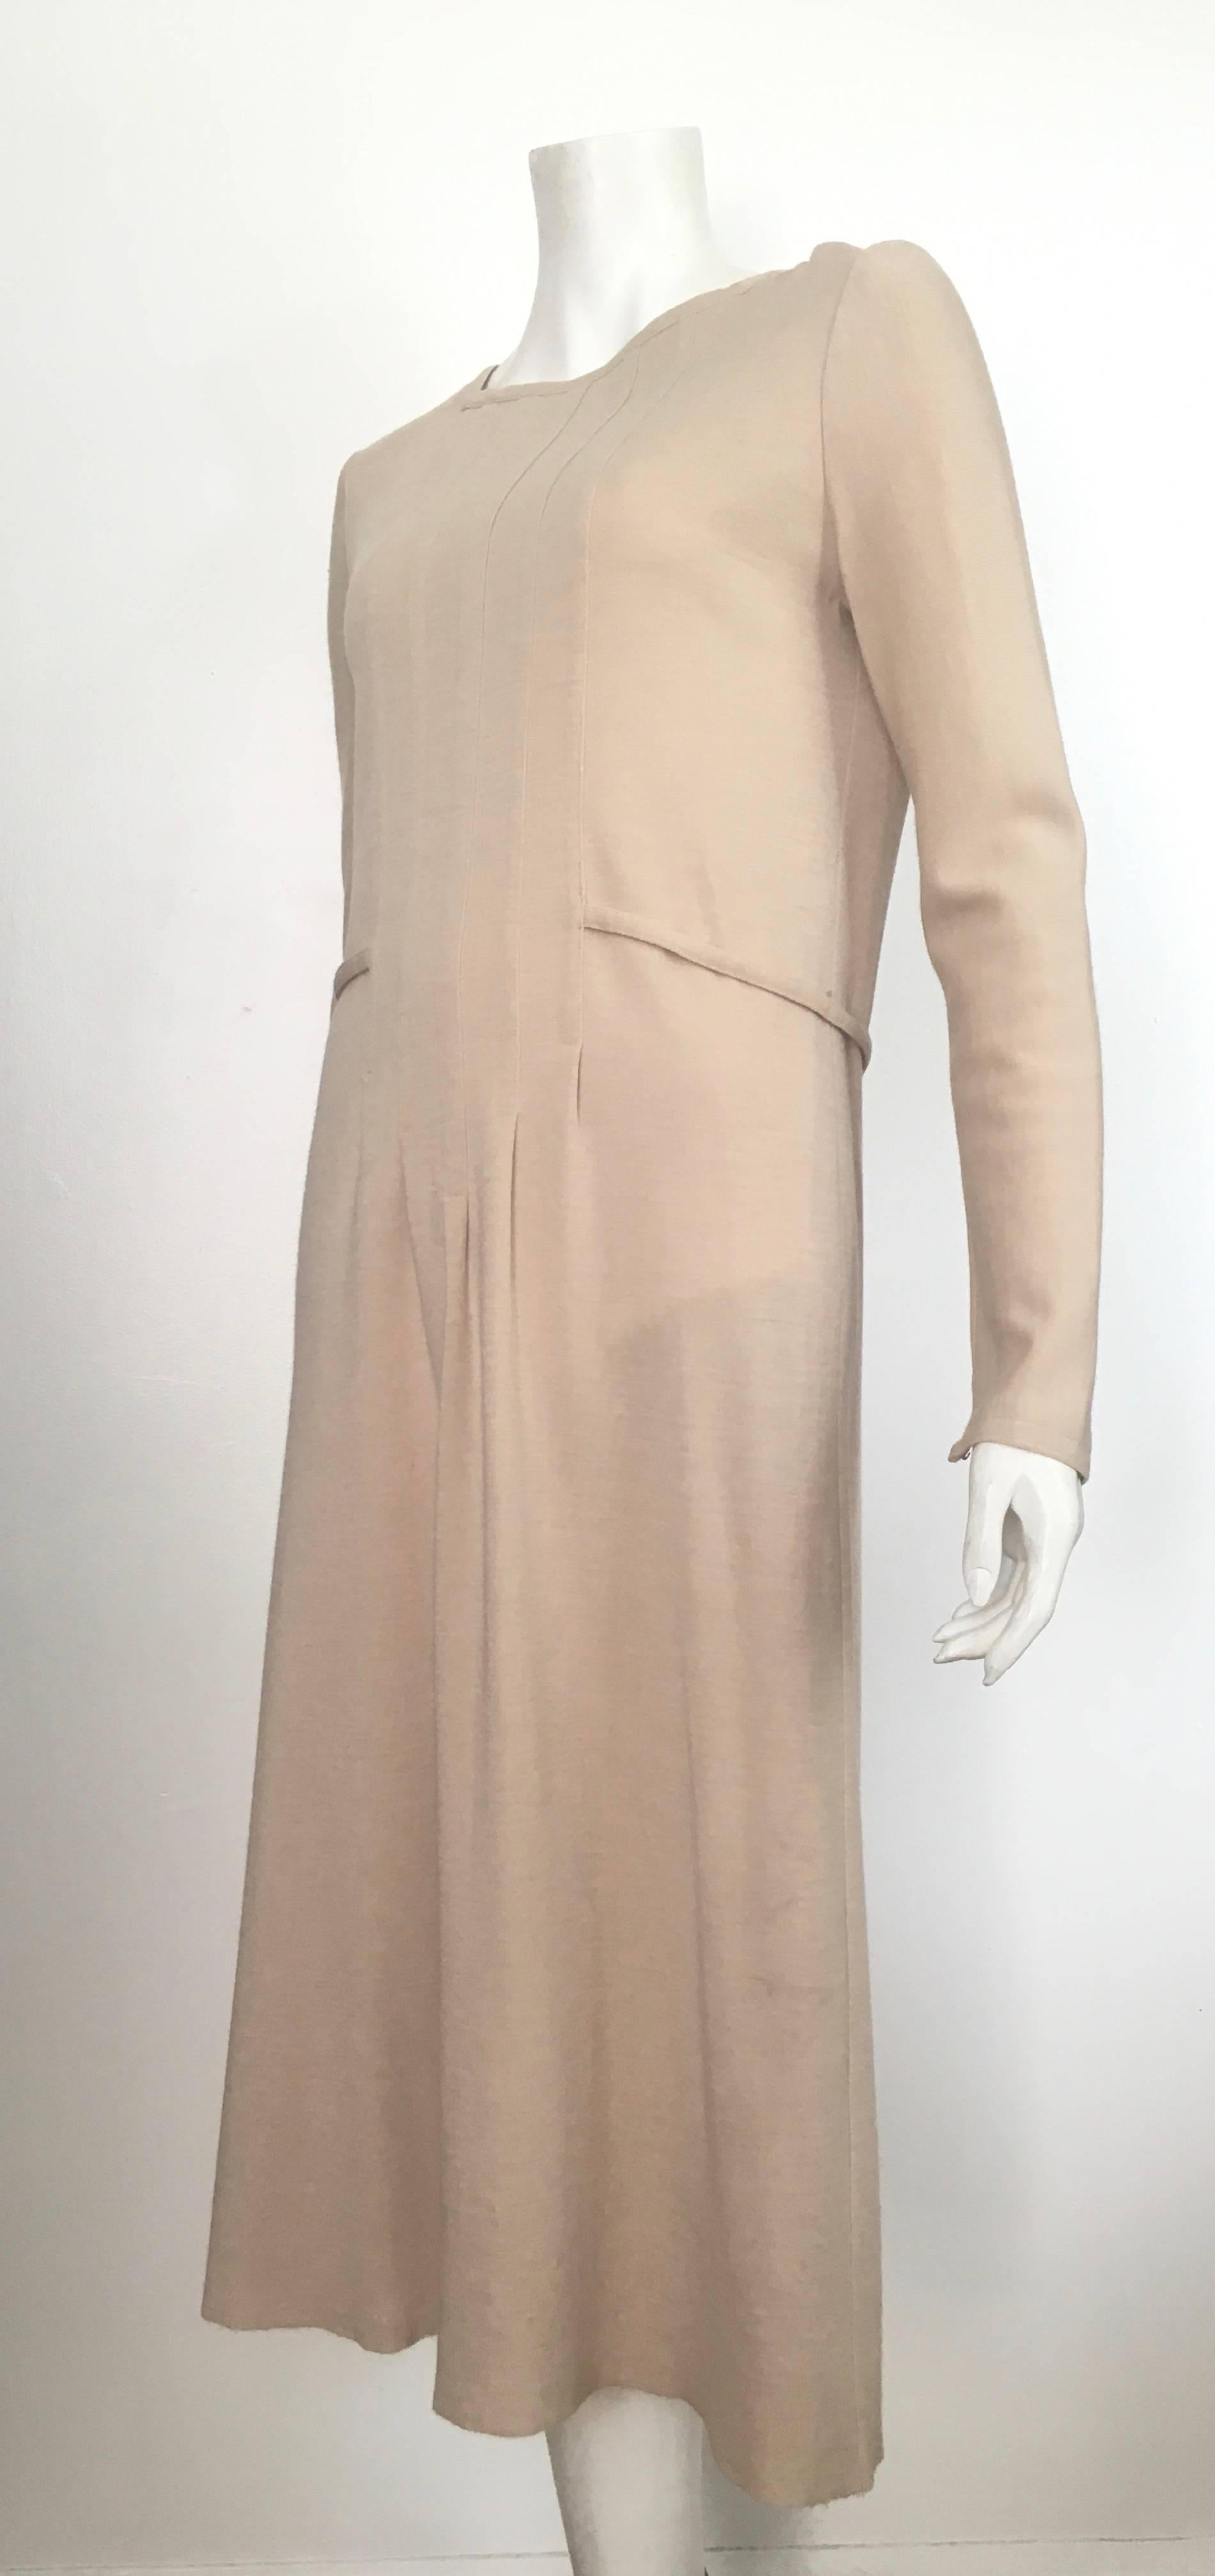 Geoffrey Beene Boutique 1970s Wool Knit Tan Long Sleeve Dress Size 8. In Excellent Condition For Sale In Atlanta, GA